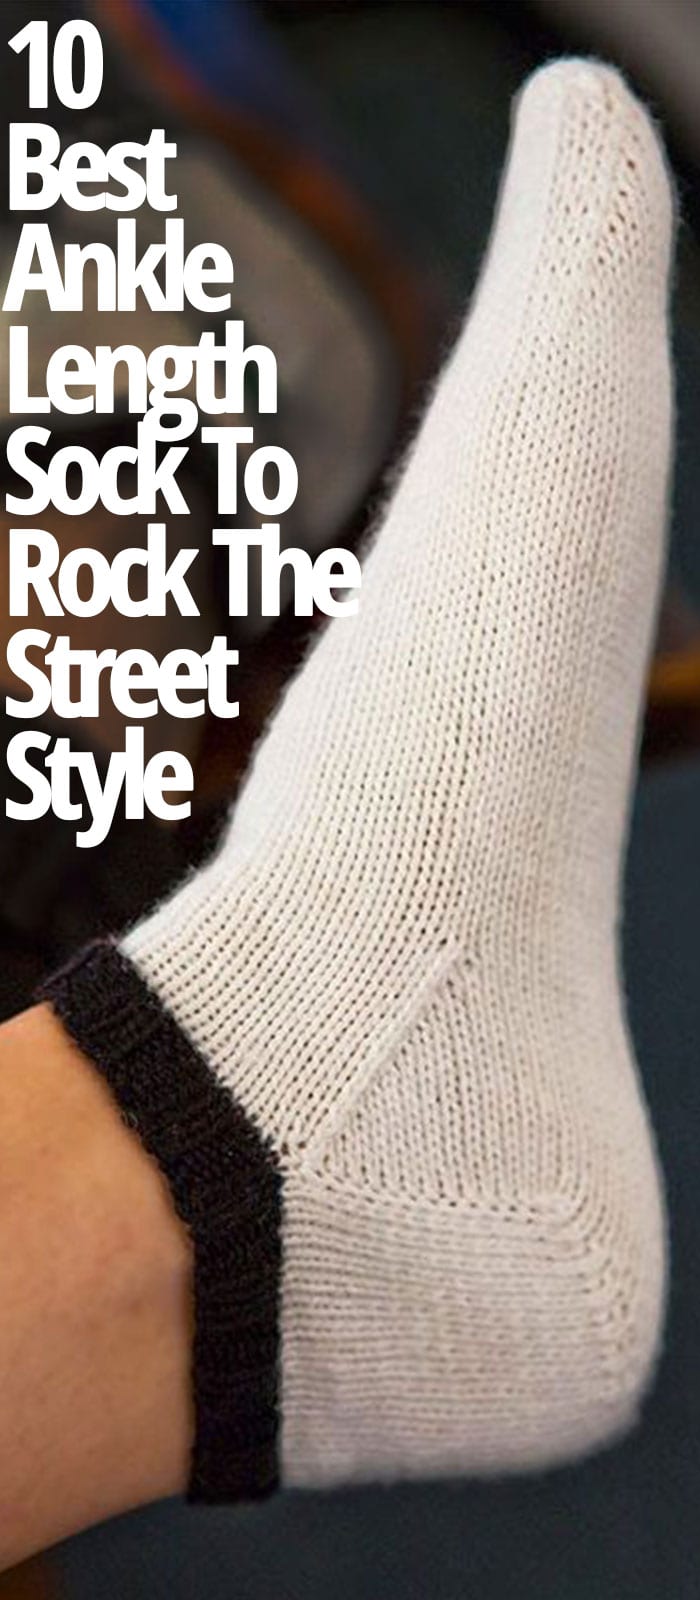 ANKLE LENGTH SOCKS TO ROCK THE STREET STYLE